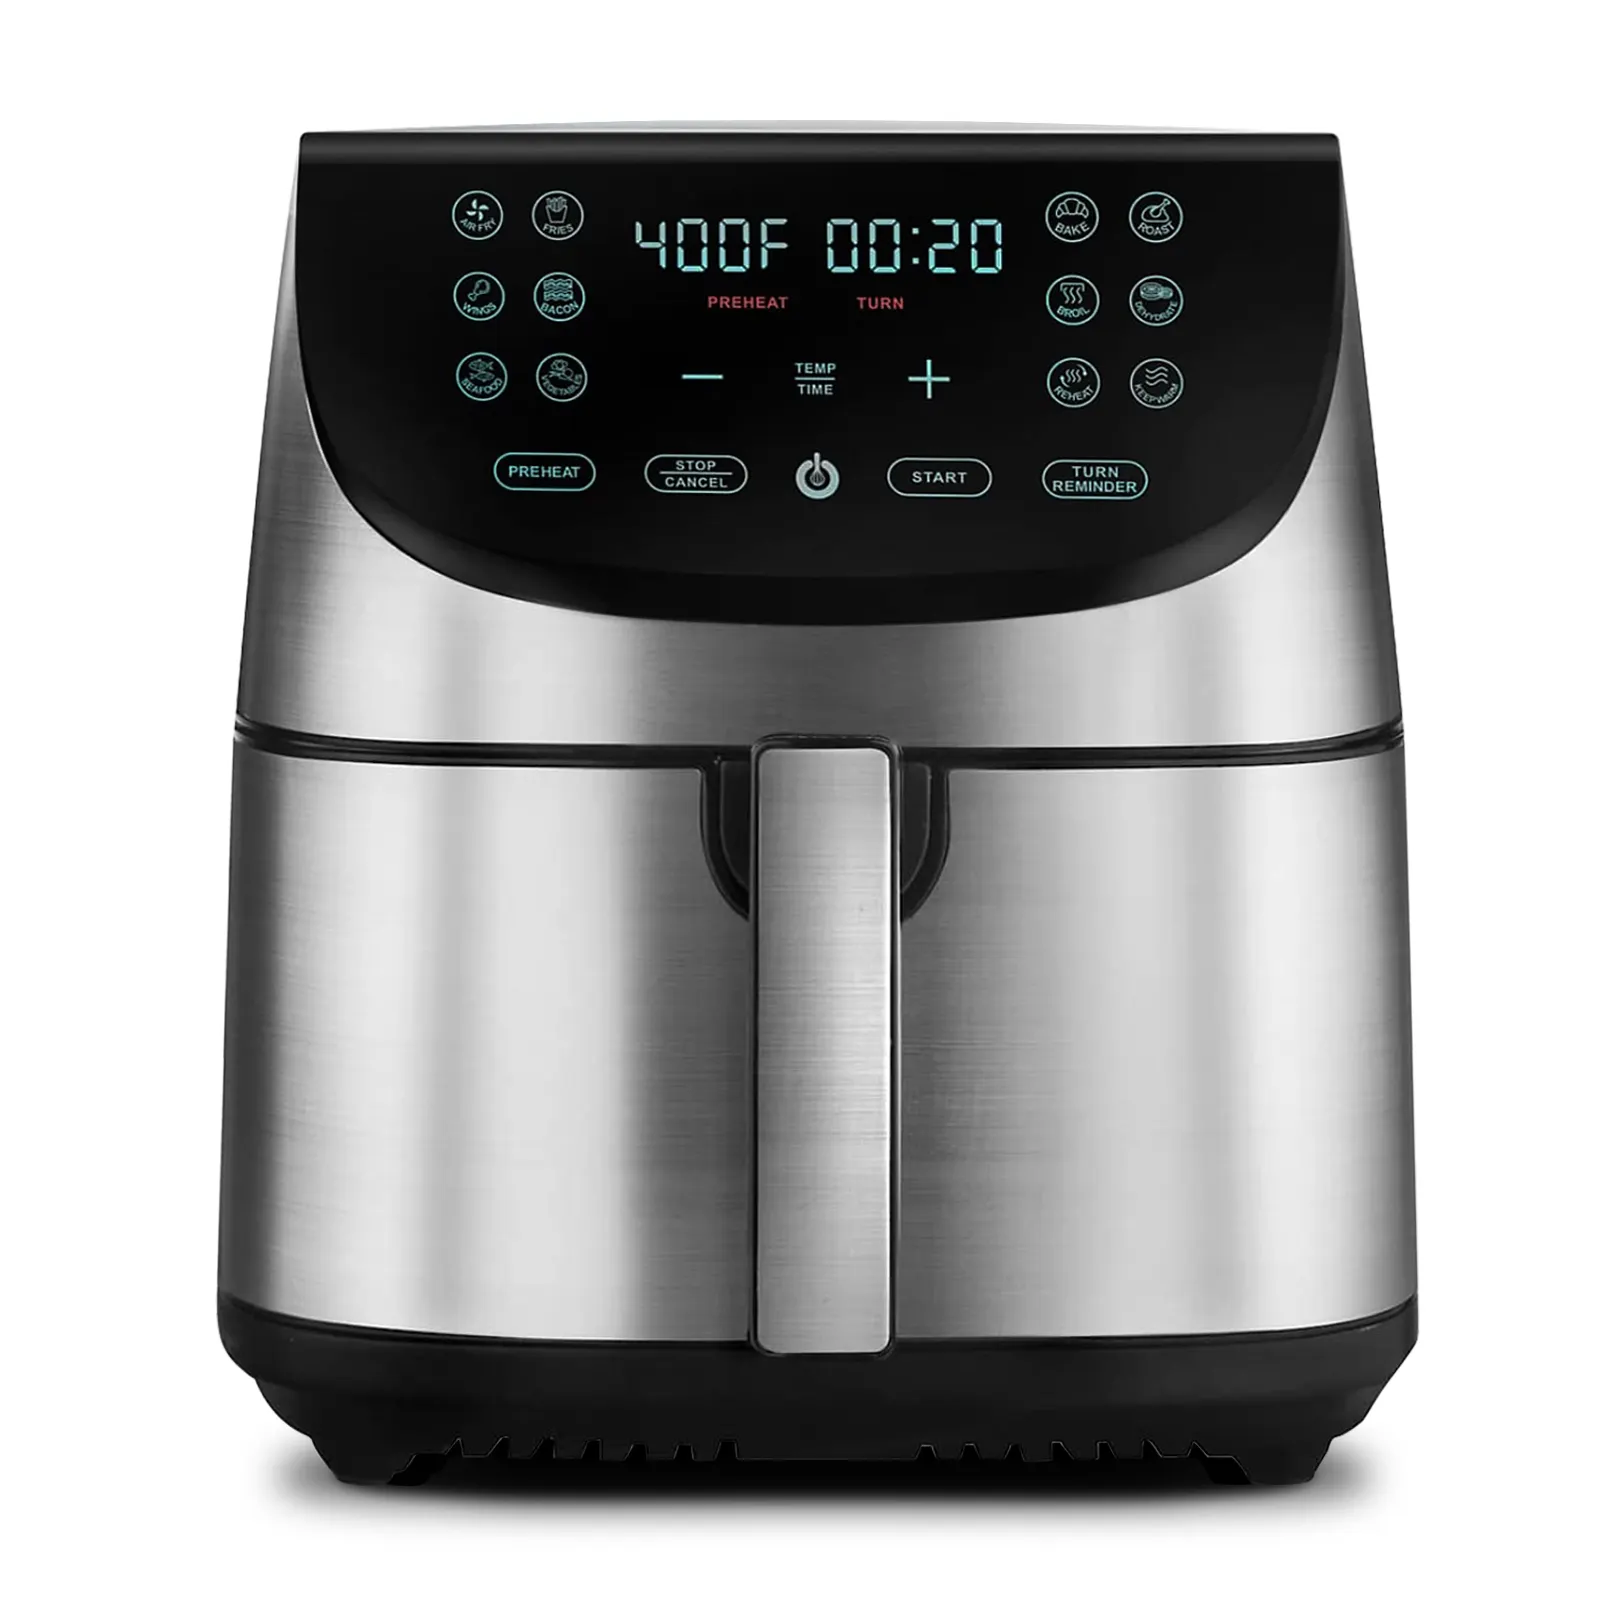 professional good quality DIGITAL TOUCHSCREEN air fryer cooker oven air fryer oster machine price air fryers